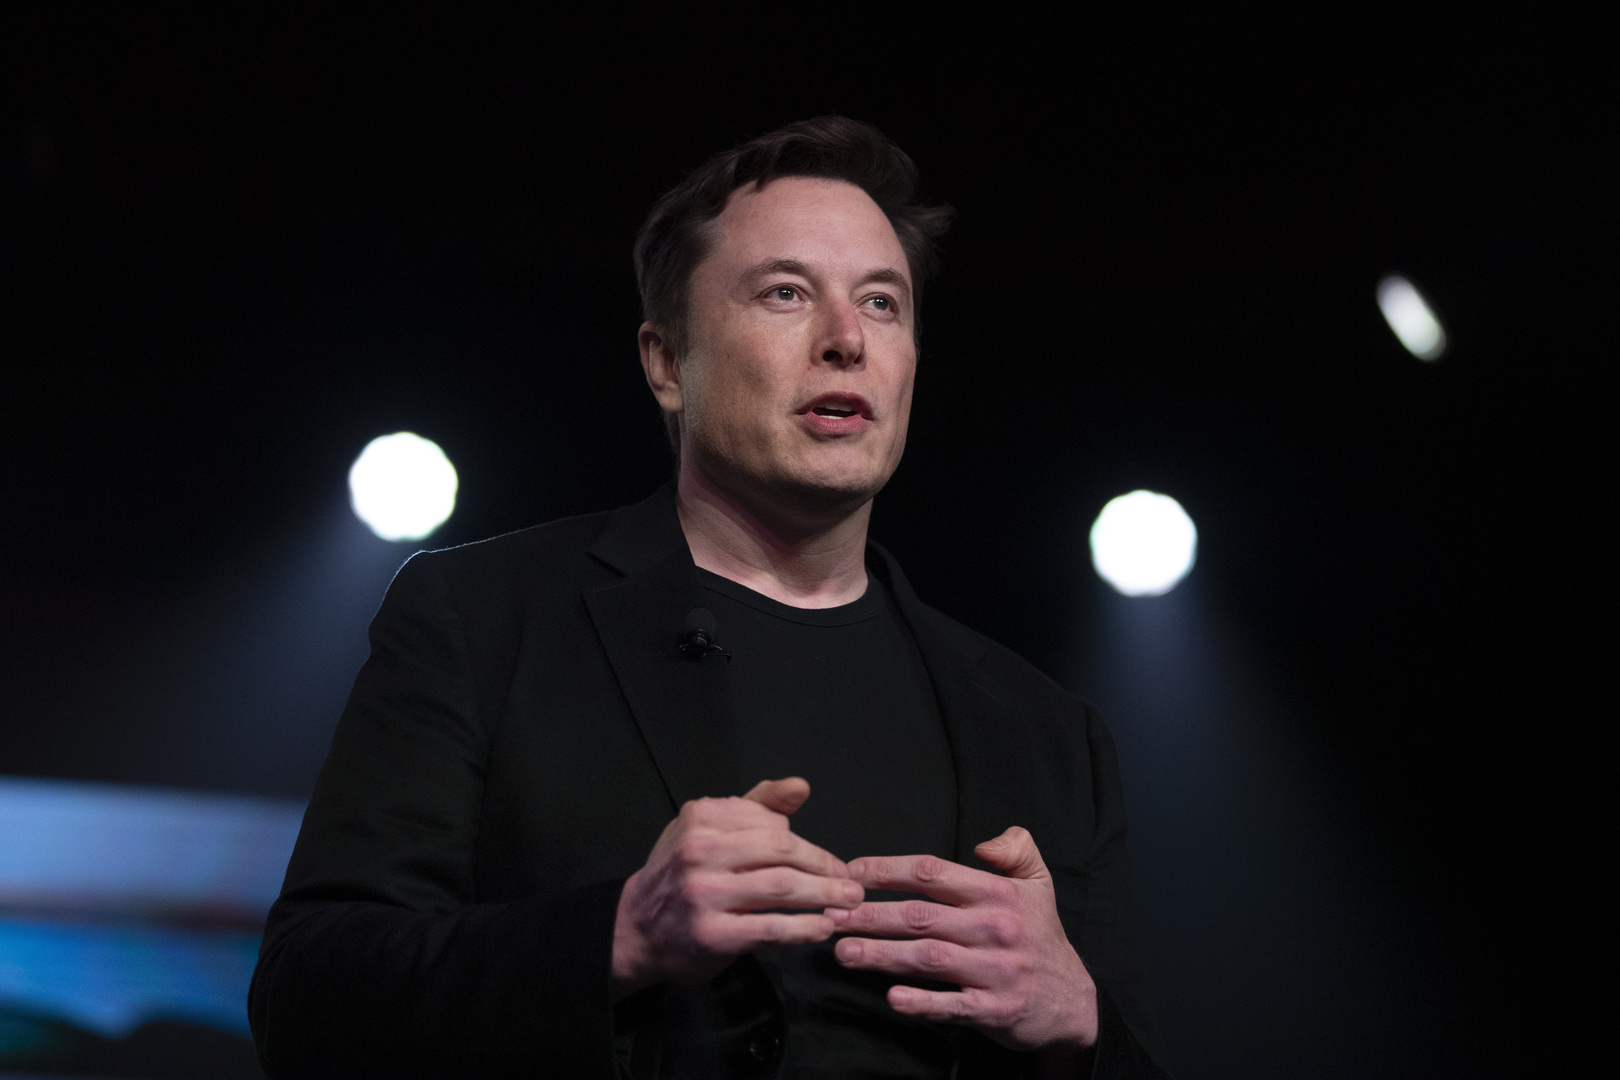 Elon Musk scrutinized the views of his supporters 